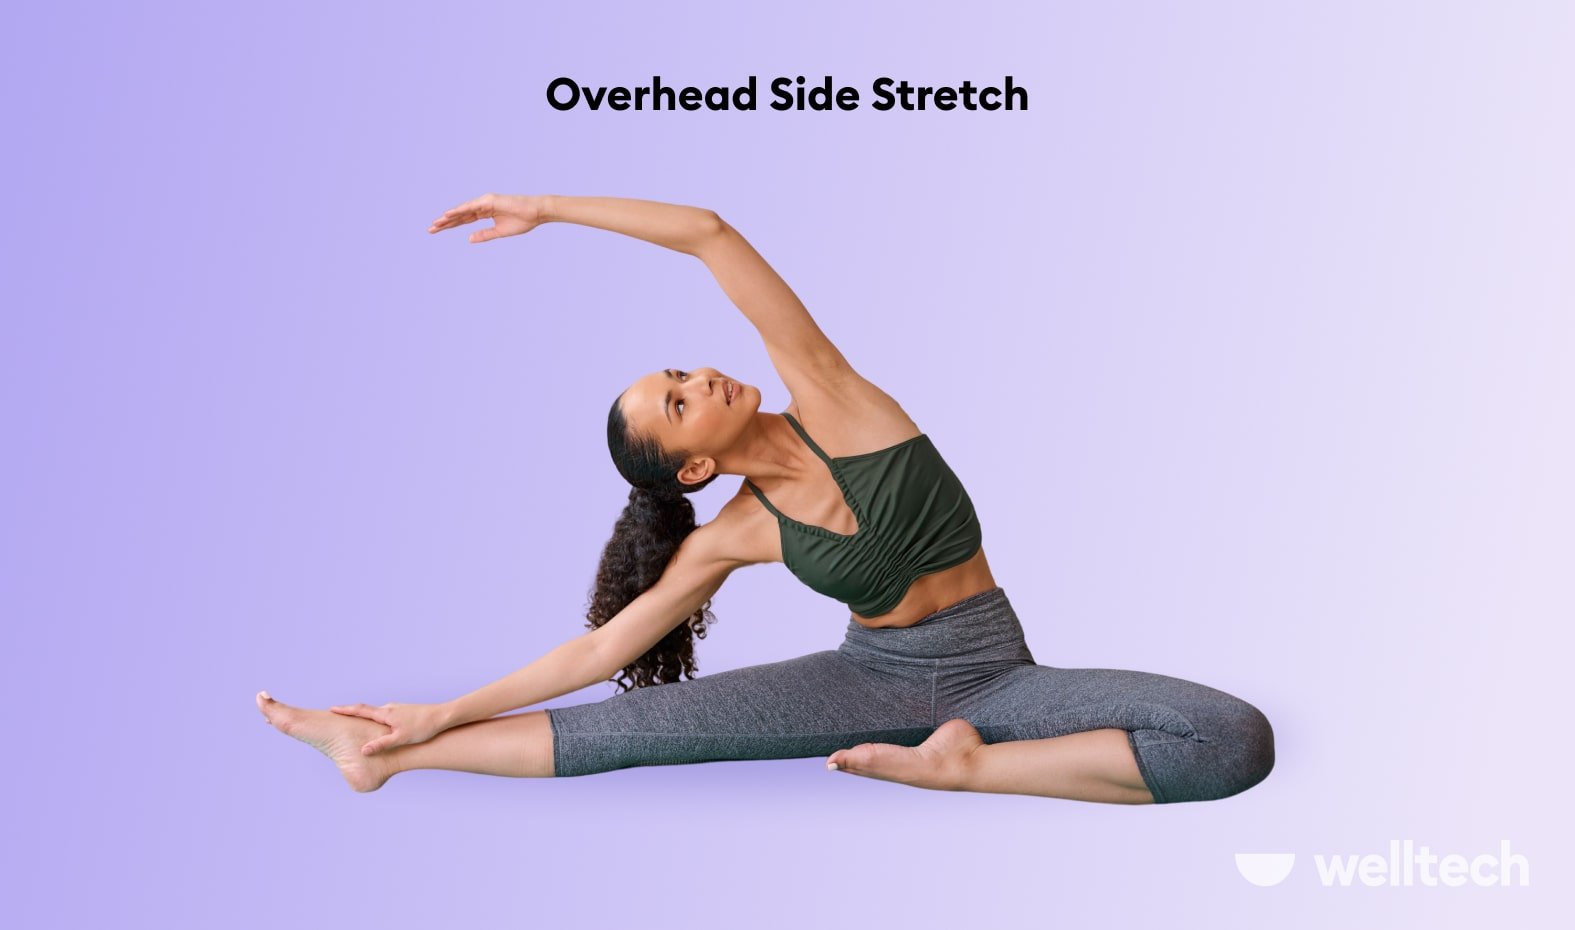 a woman is performing Overhead side stretch_stretches to decompress spine